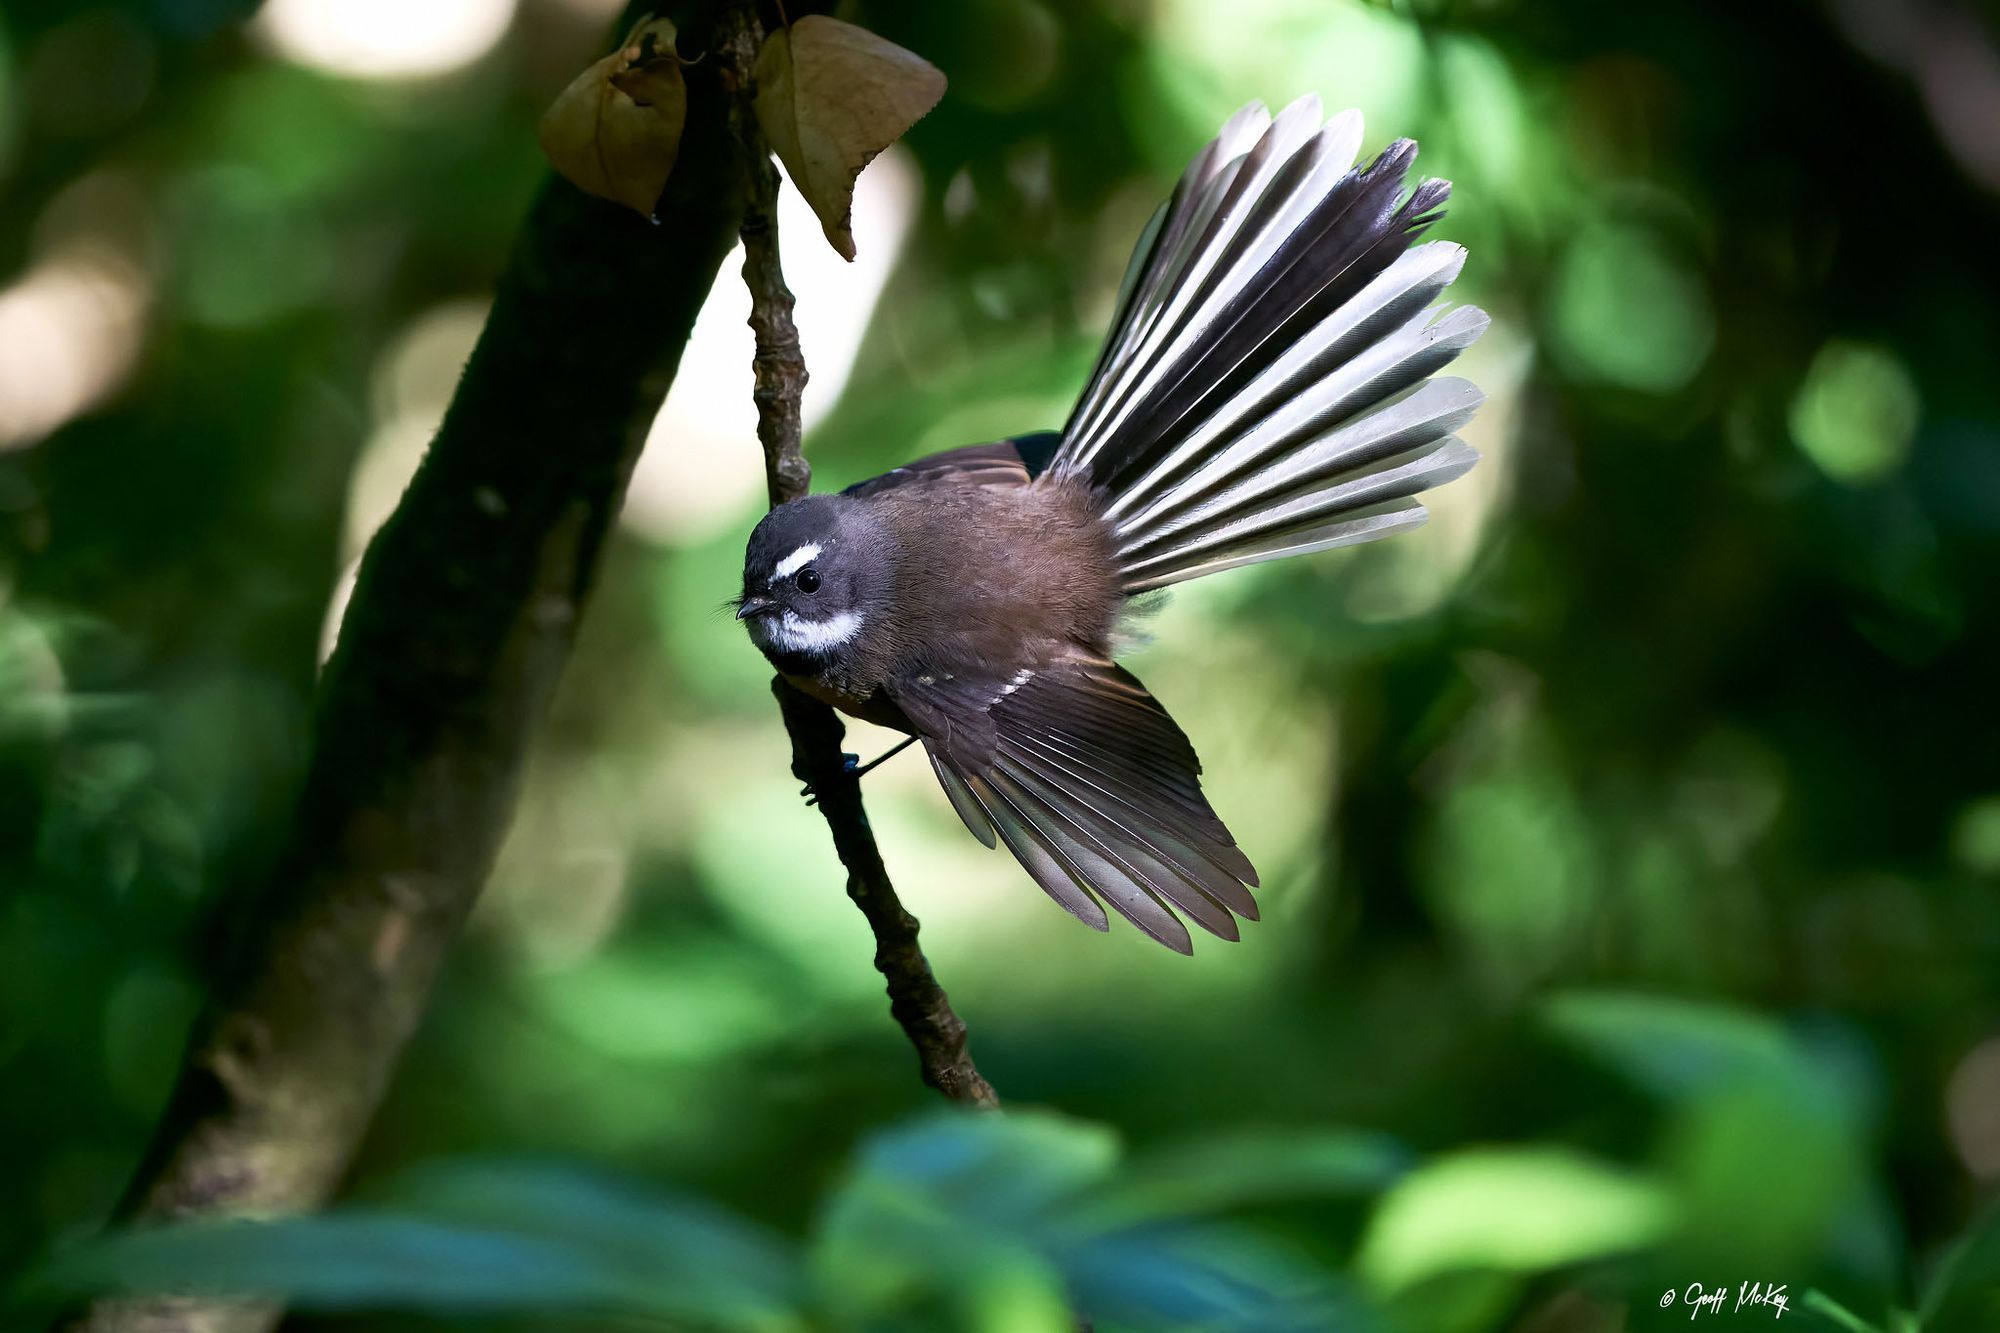 A fantail perched on a branch in the forest